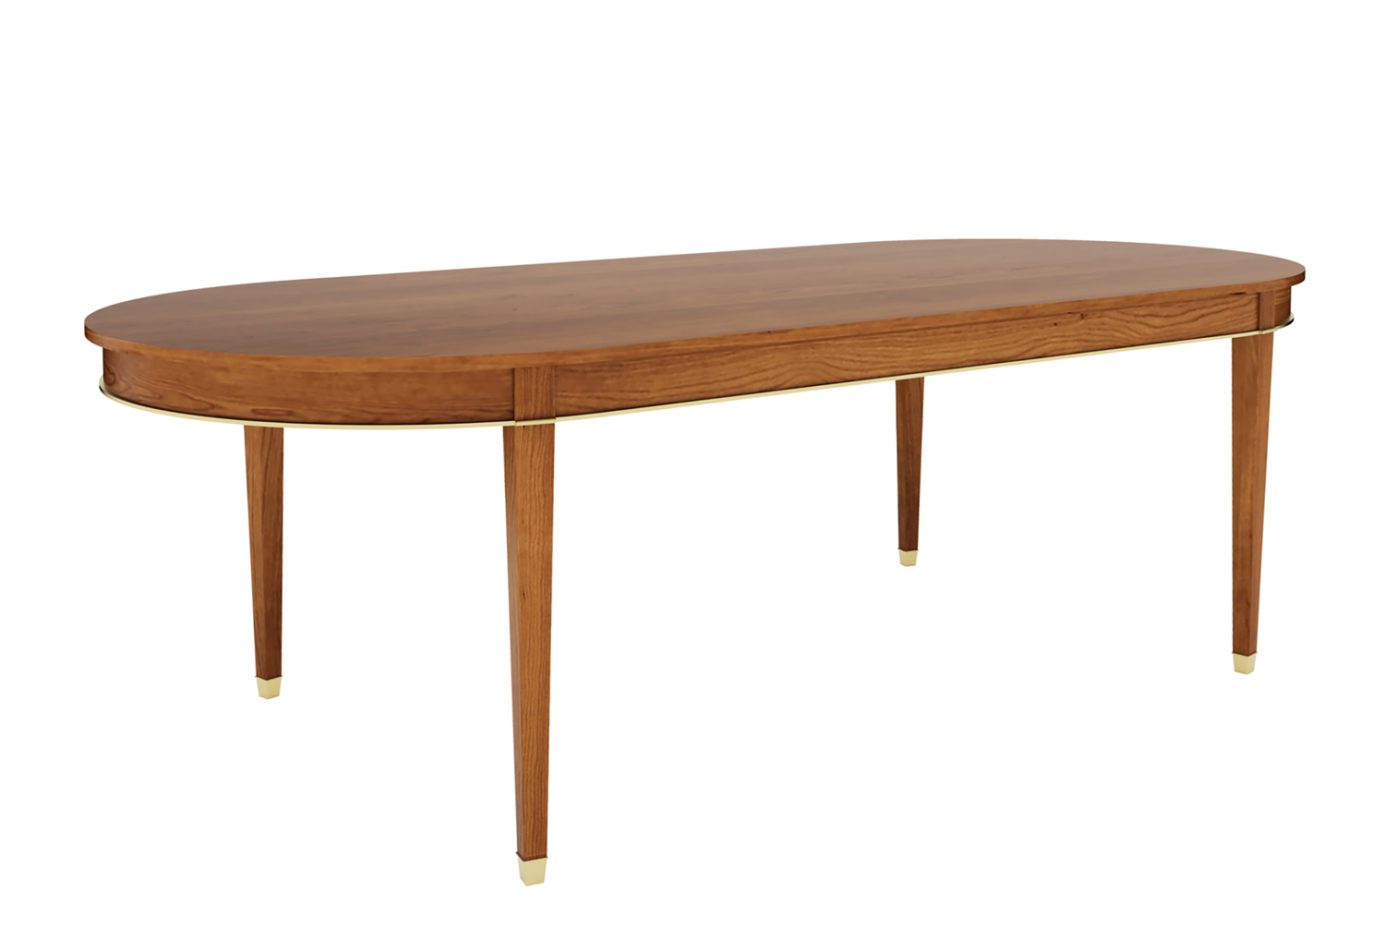 The Lincoln Dining Table rendered in cherry.